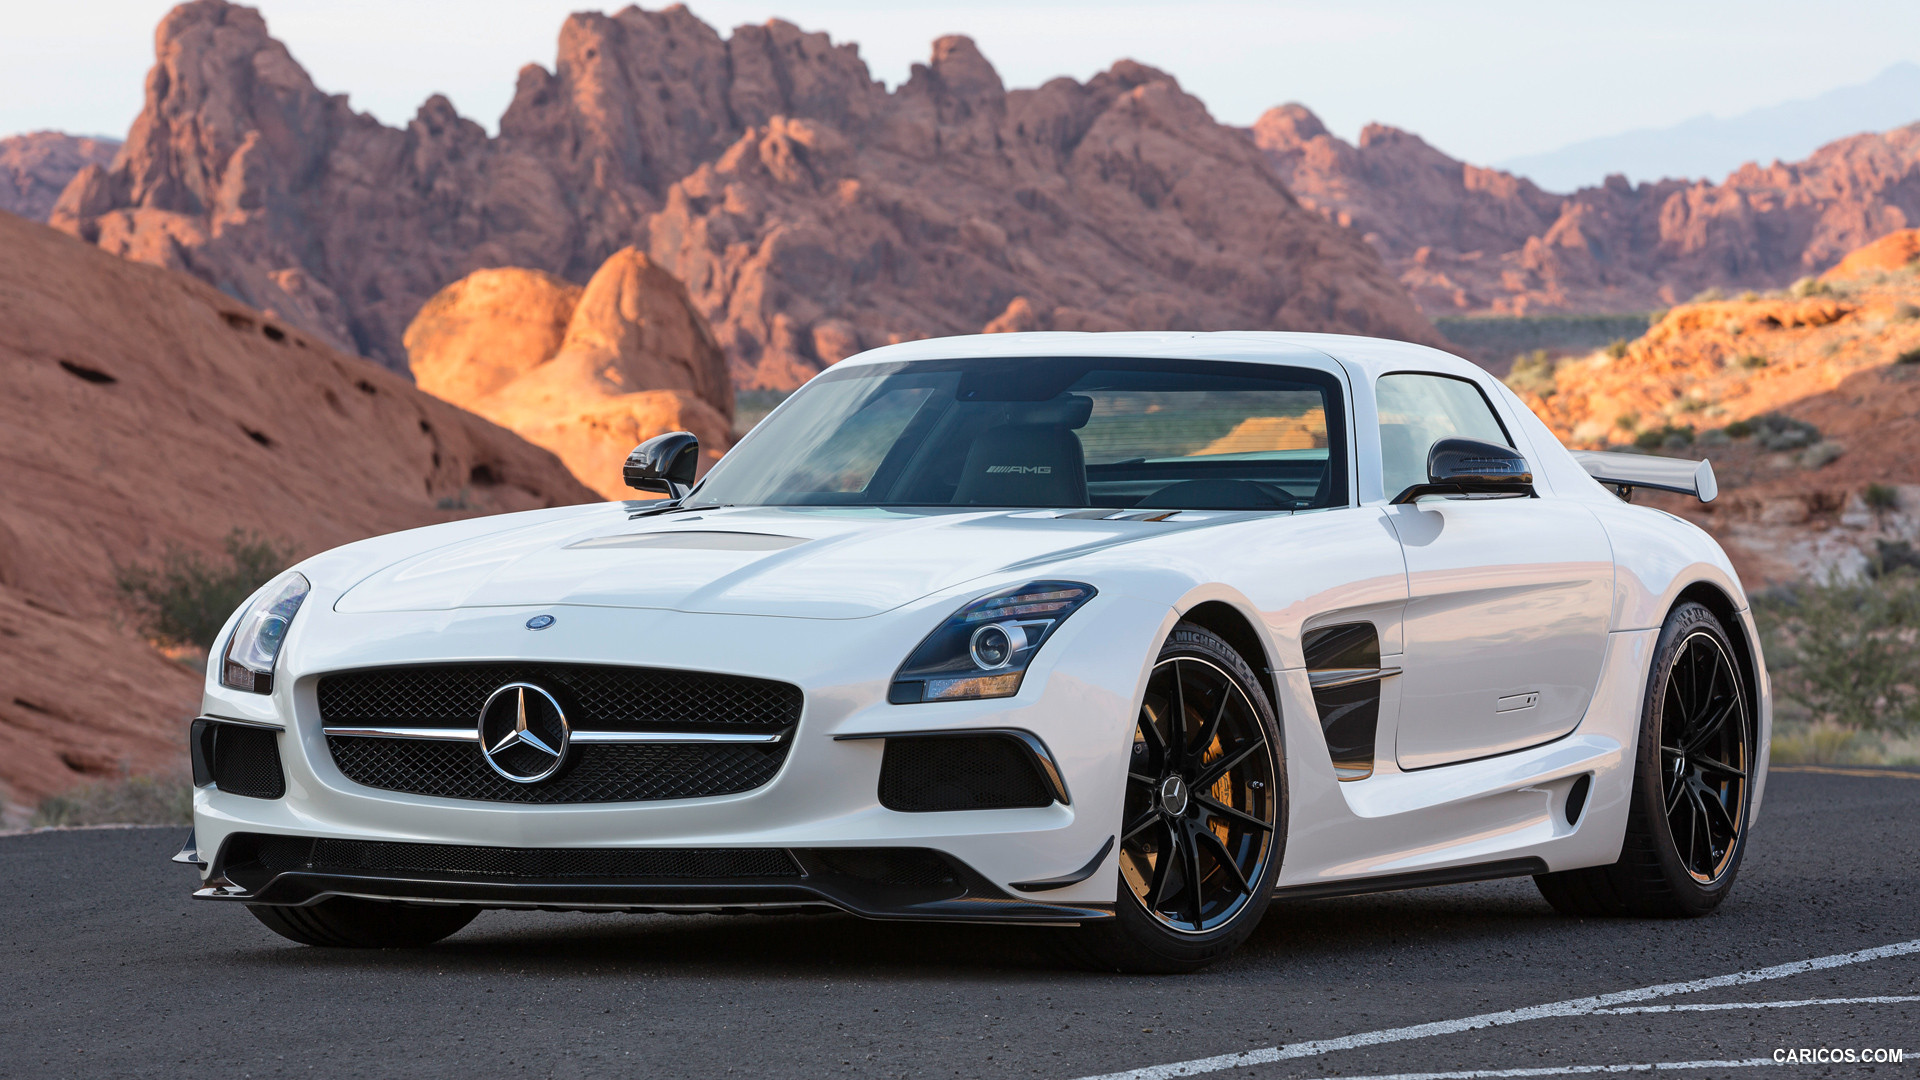 2014 Mercedes-Benz SLS AMG Coupe Black Series White - Front, #9 of 40